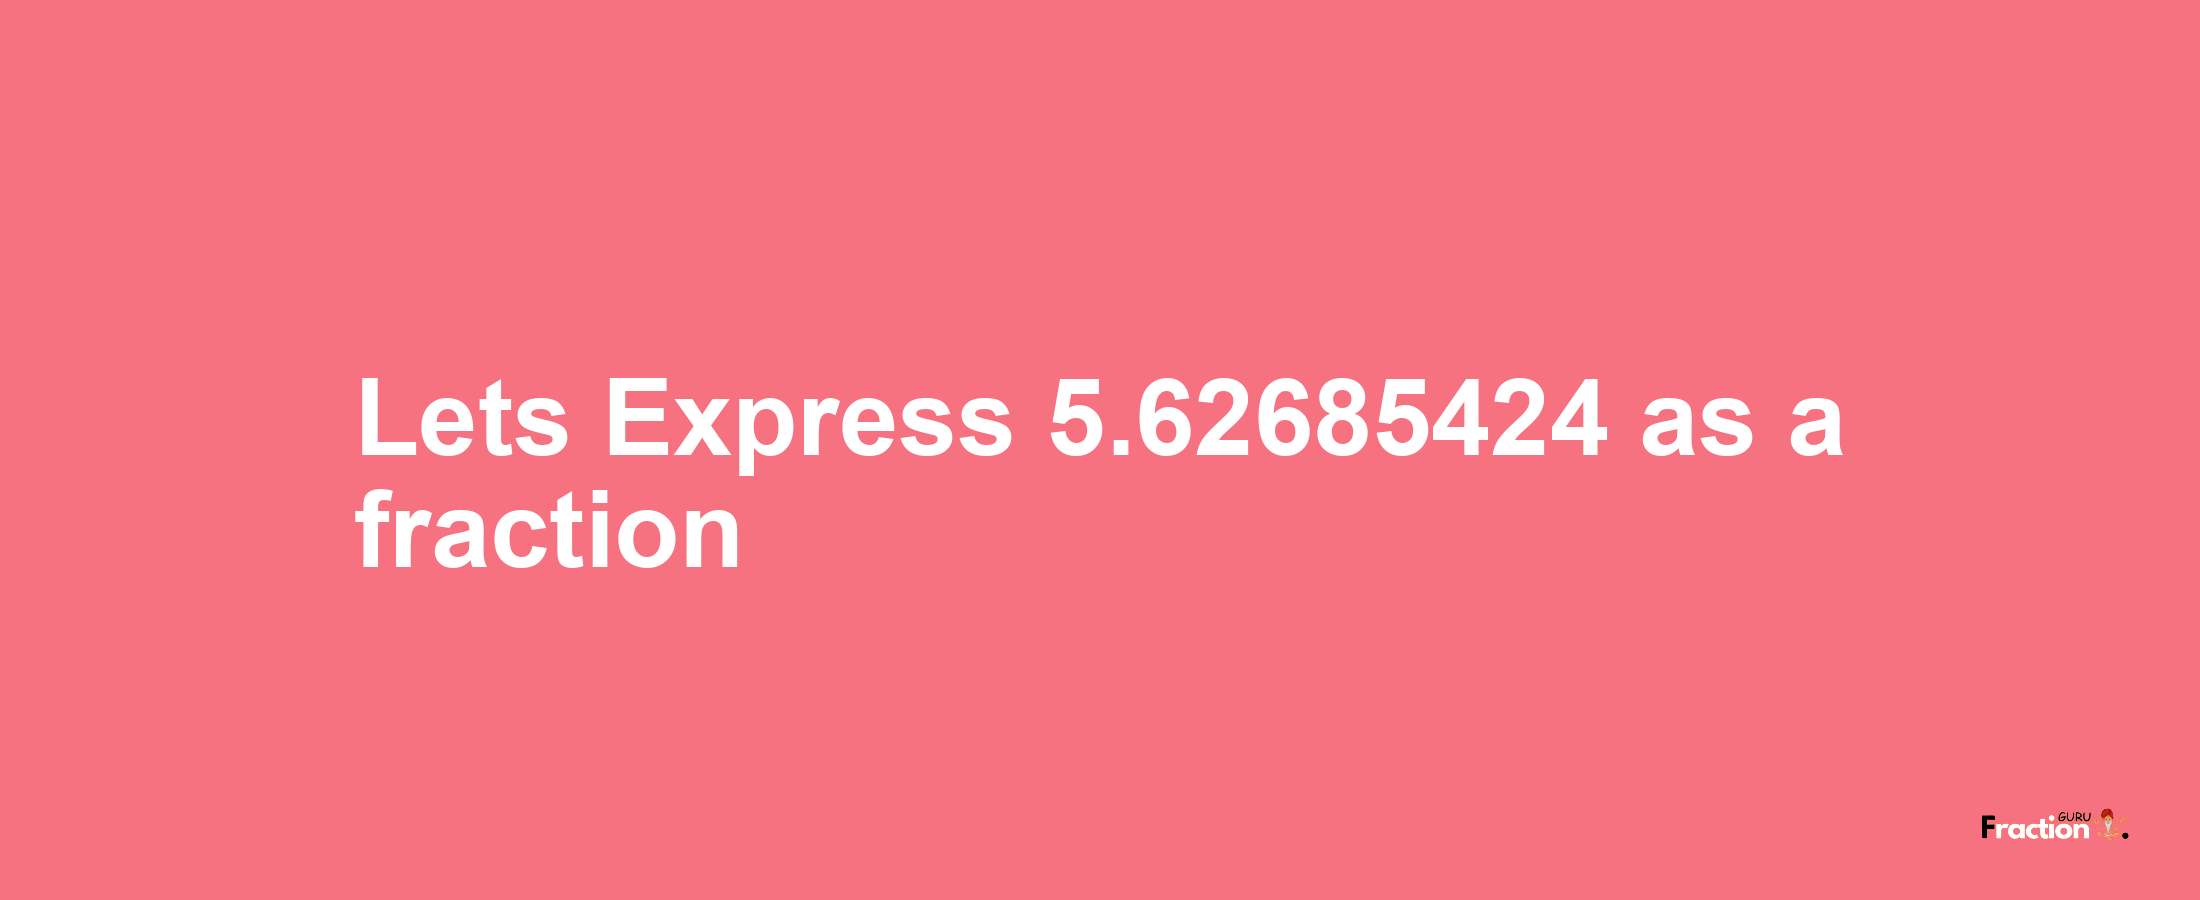 Lets Express 5.62685424 as afraction